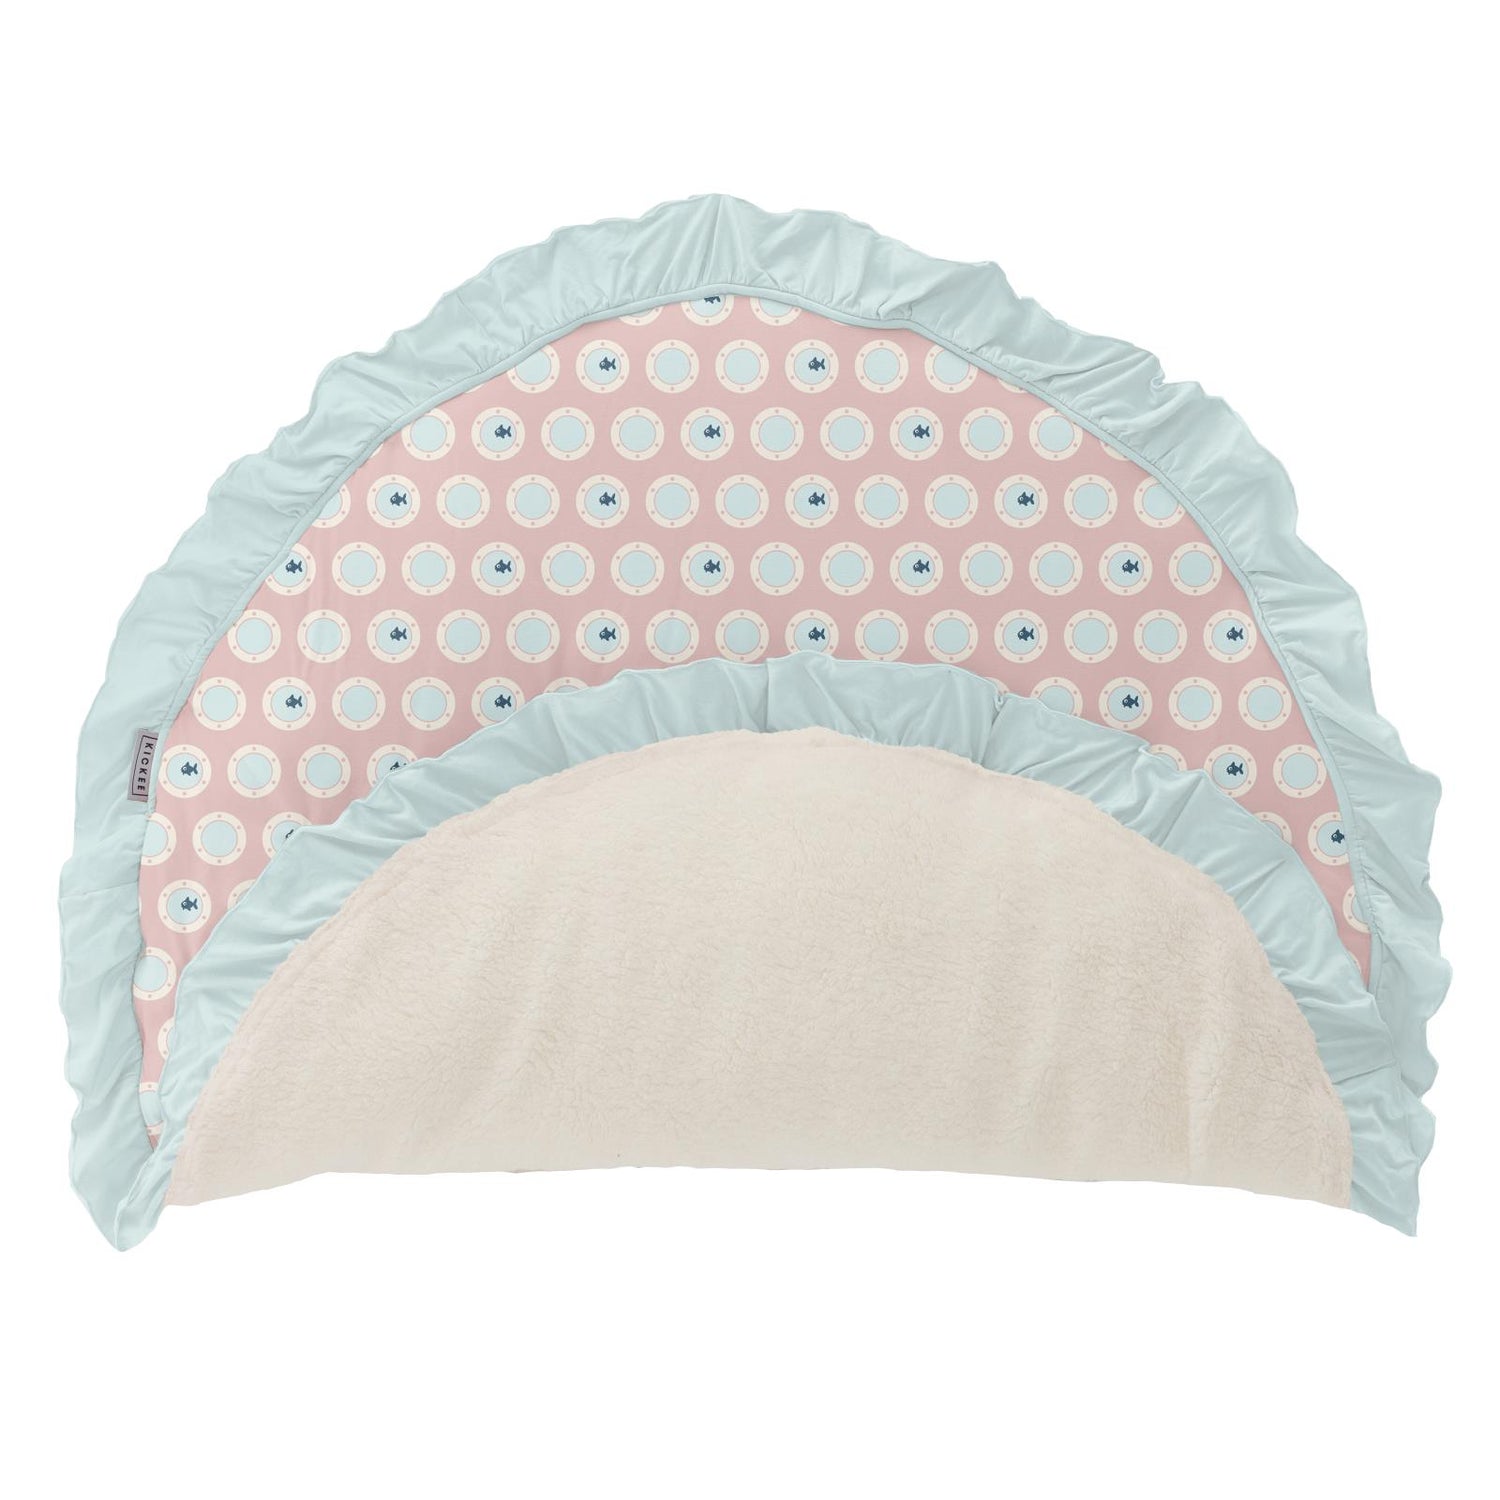 Print Sherpa-Lined Ruffle Fluffle Playmat in Baby Rose Porthole